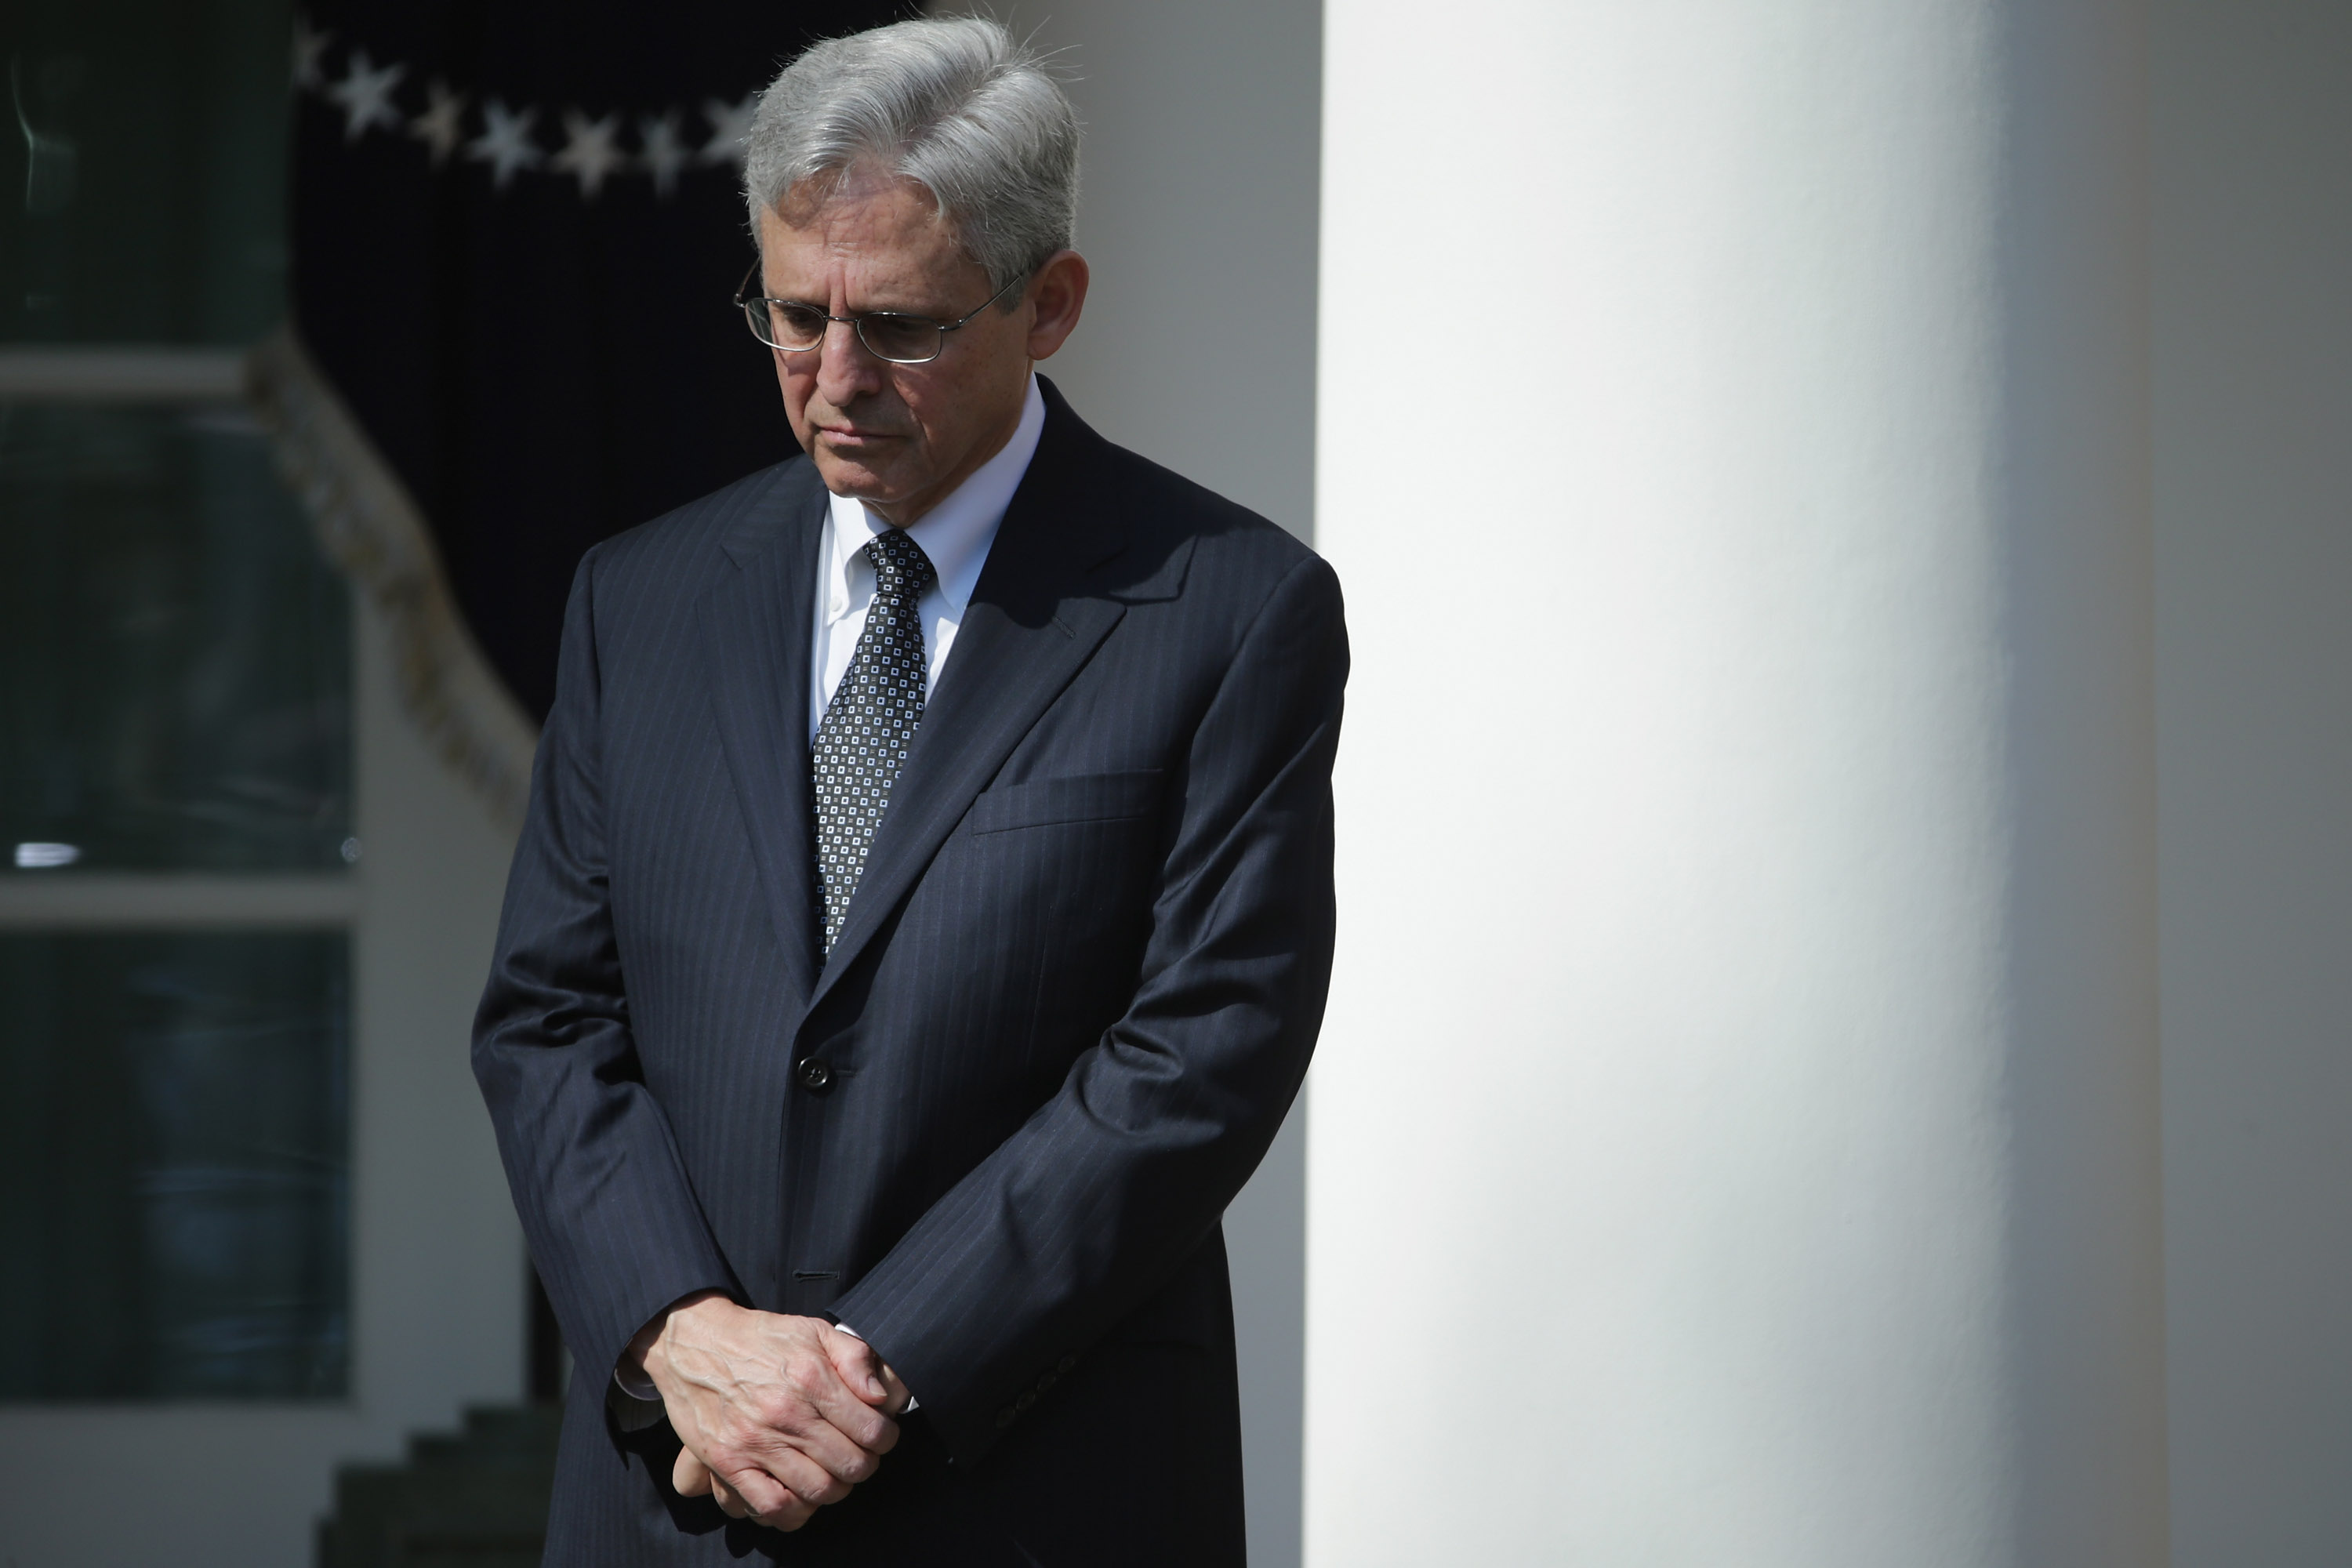 Judge Merrick Garland, U.S. President Barack Obama's nominee to replace the late Supreme Court Justice Antonin Scalia, is introduced in the Rose Garden at the White House in Washington, D.C., on March 16, 2016. (Chip Somodevilla—Getty Images)